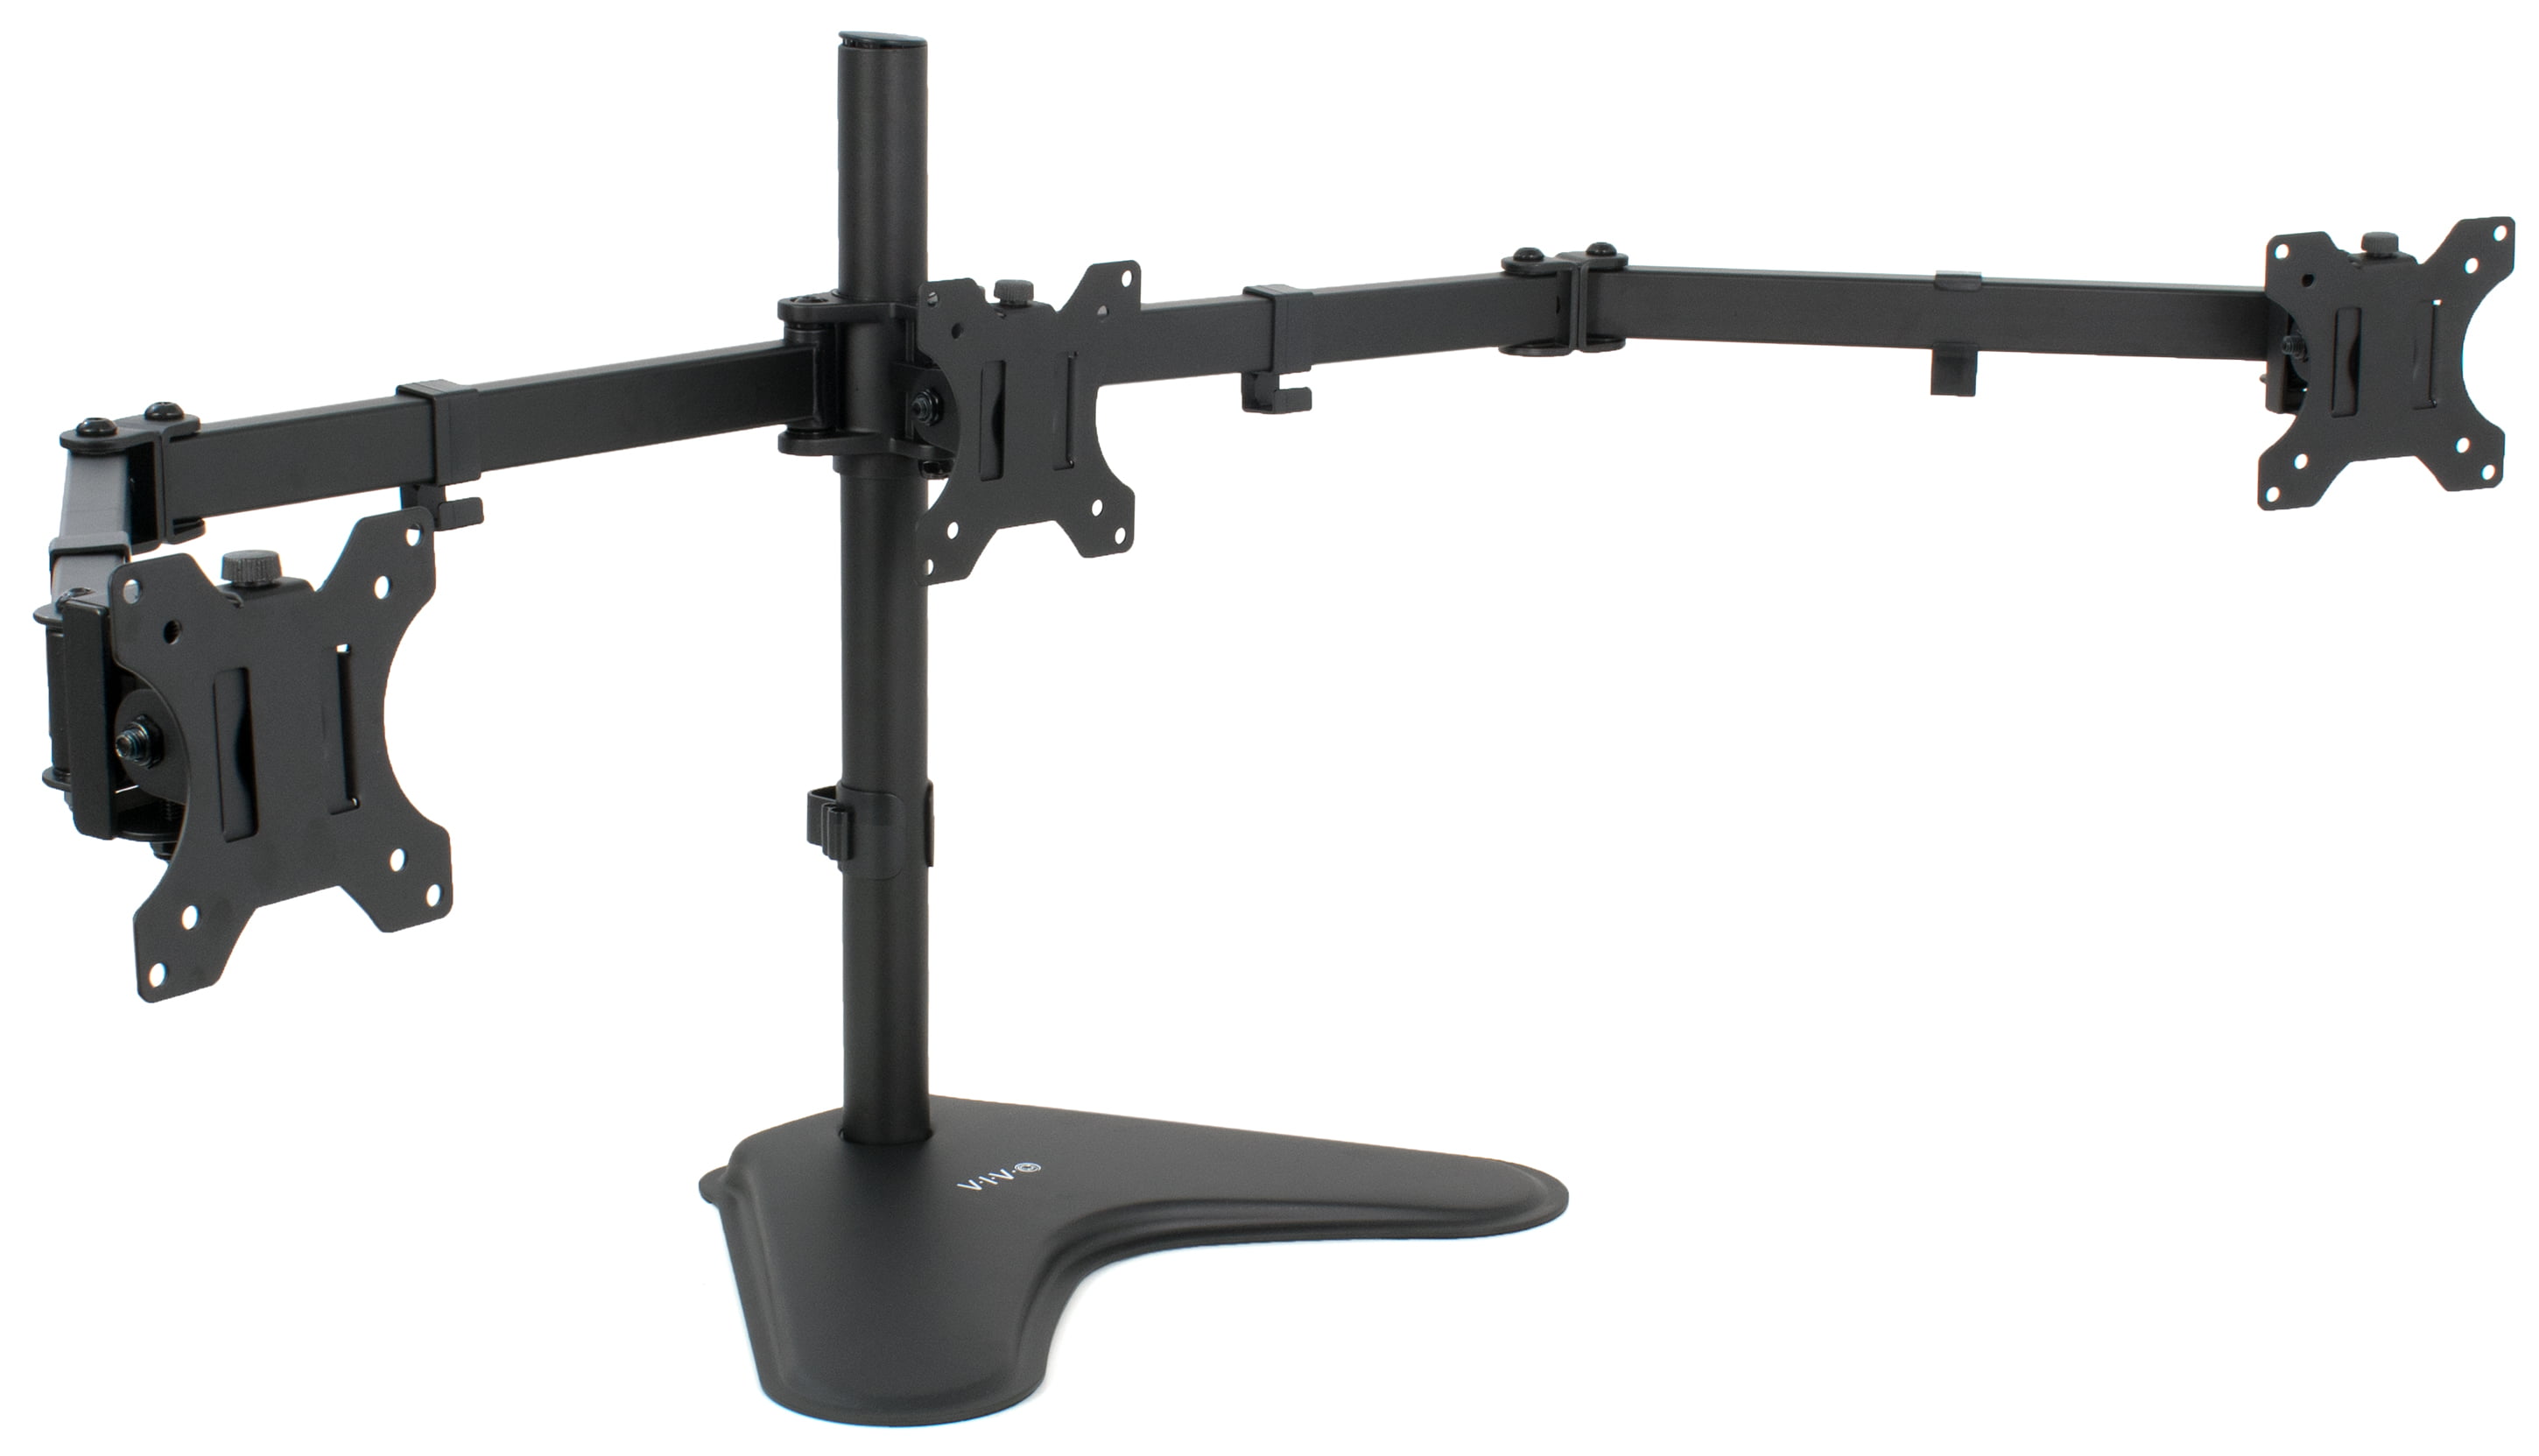 VIVO Triple Monitor Adjustable Mount Articulating Stand for 3 Screens up to 24/"